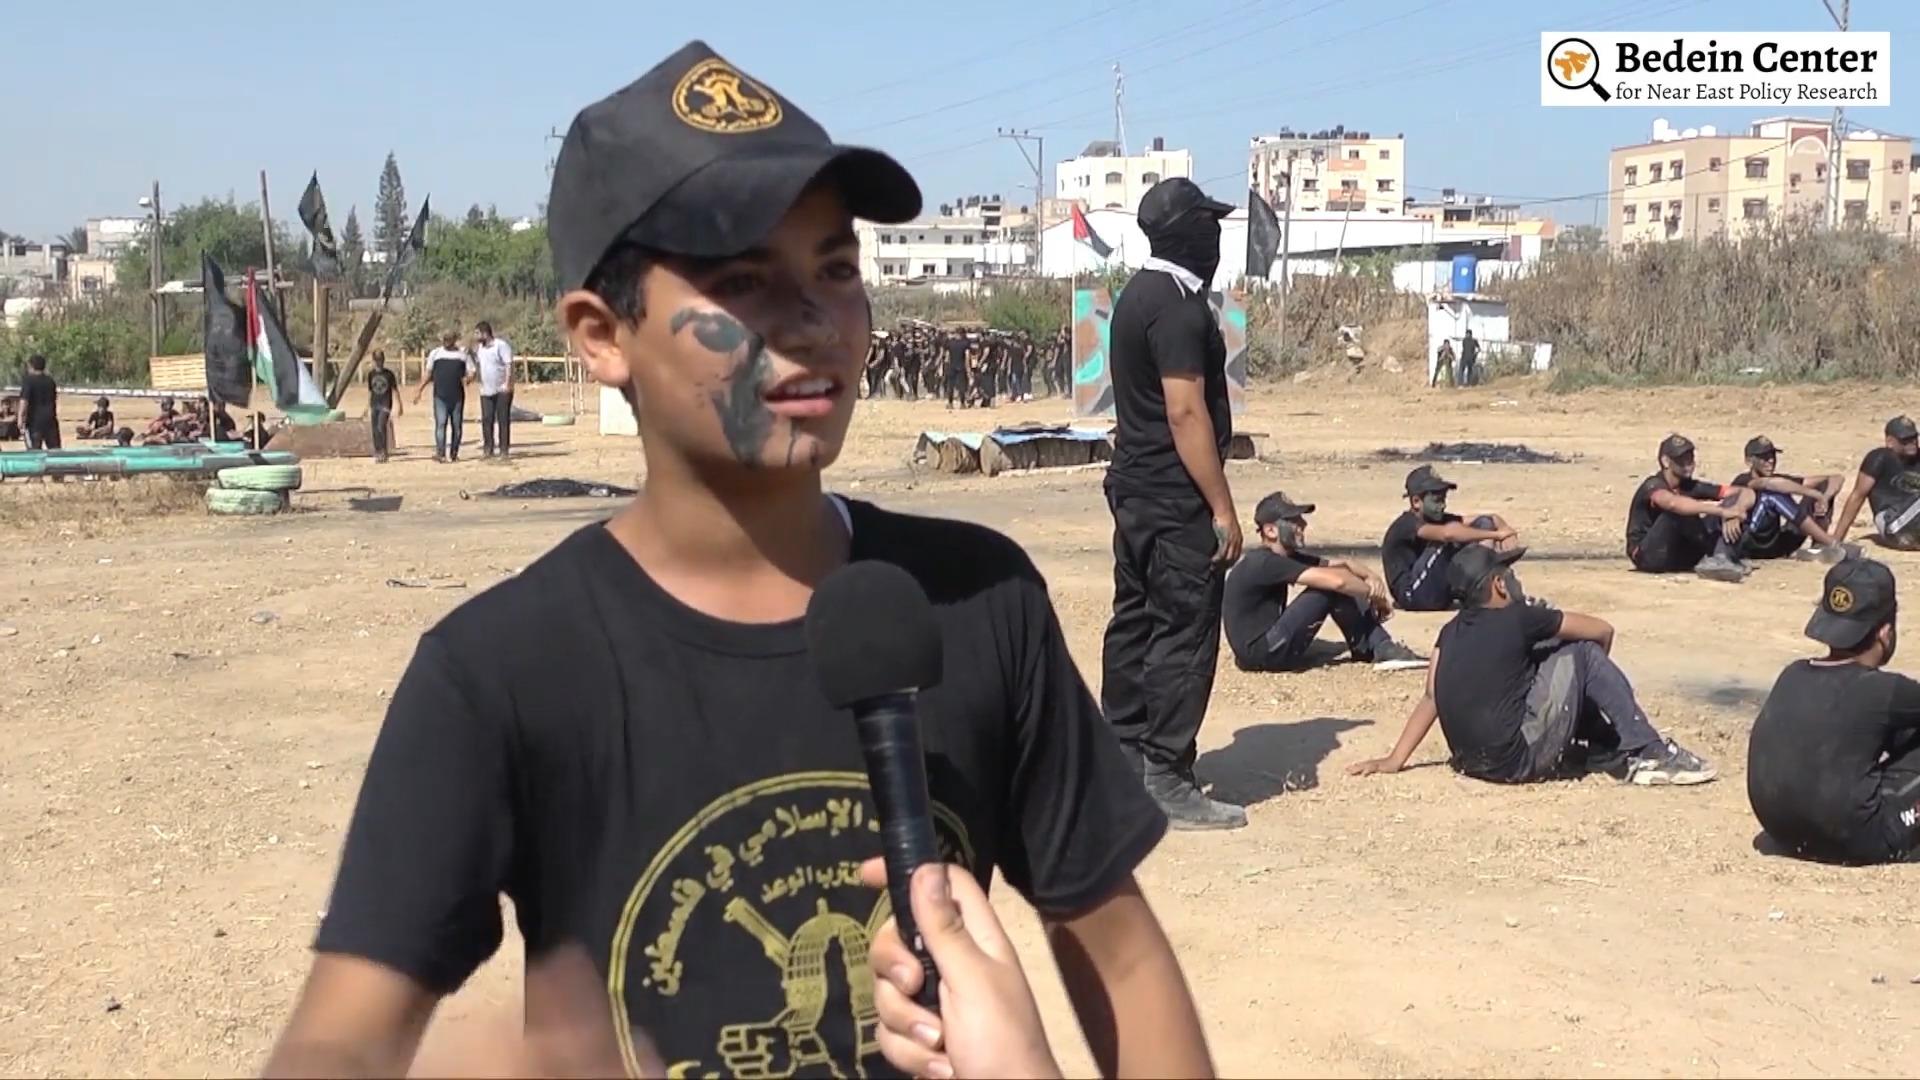 "When I grow up, I want to be a martyr" How treacherously Hamas recruits children